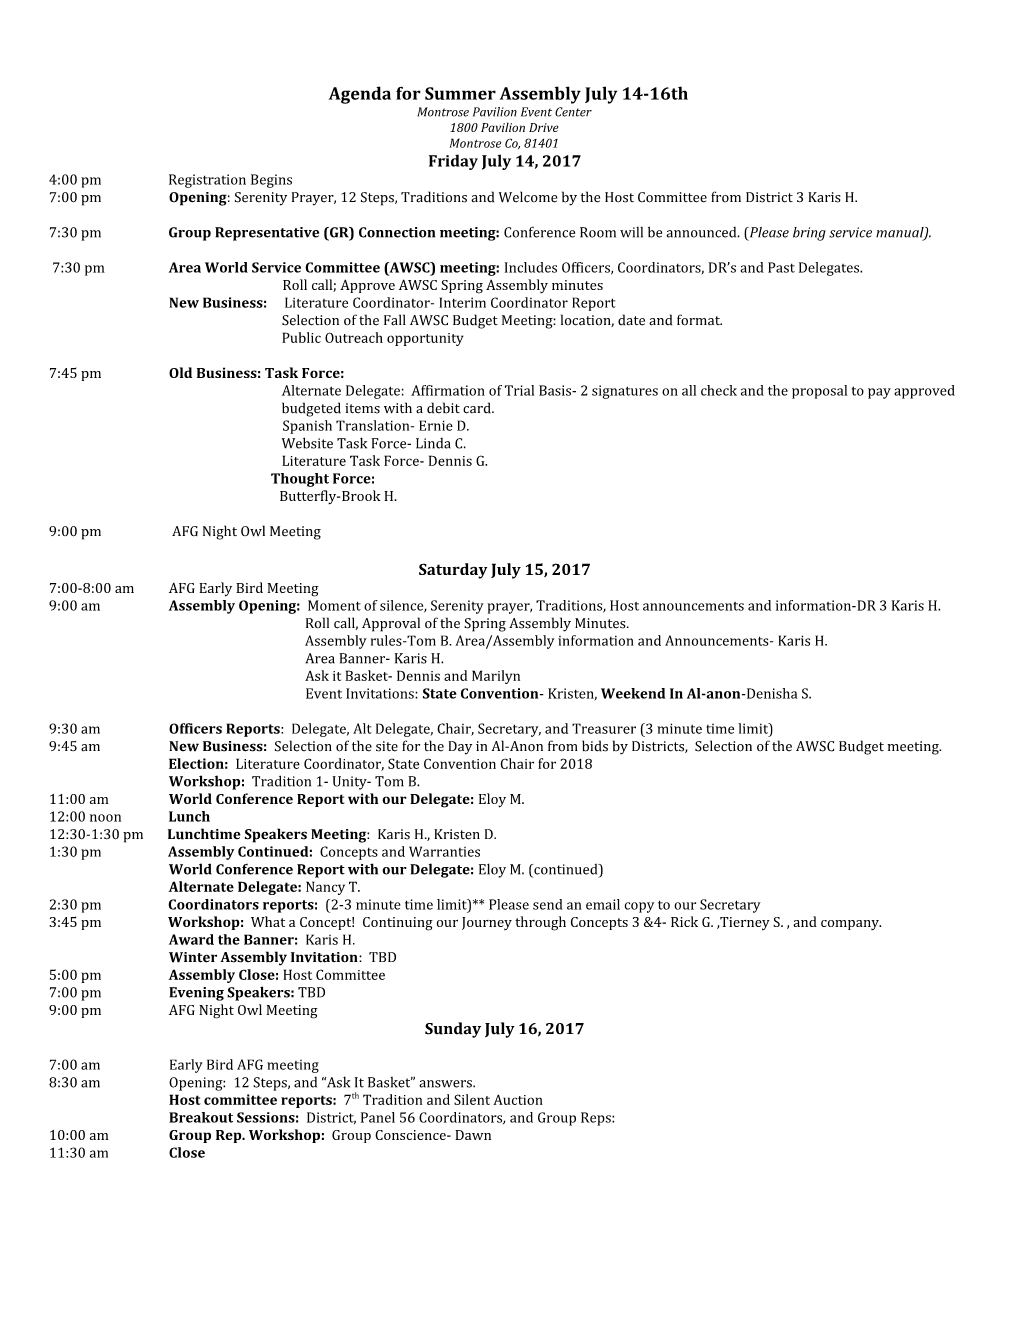 Agenda for Summer Assembly July 14-16Th